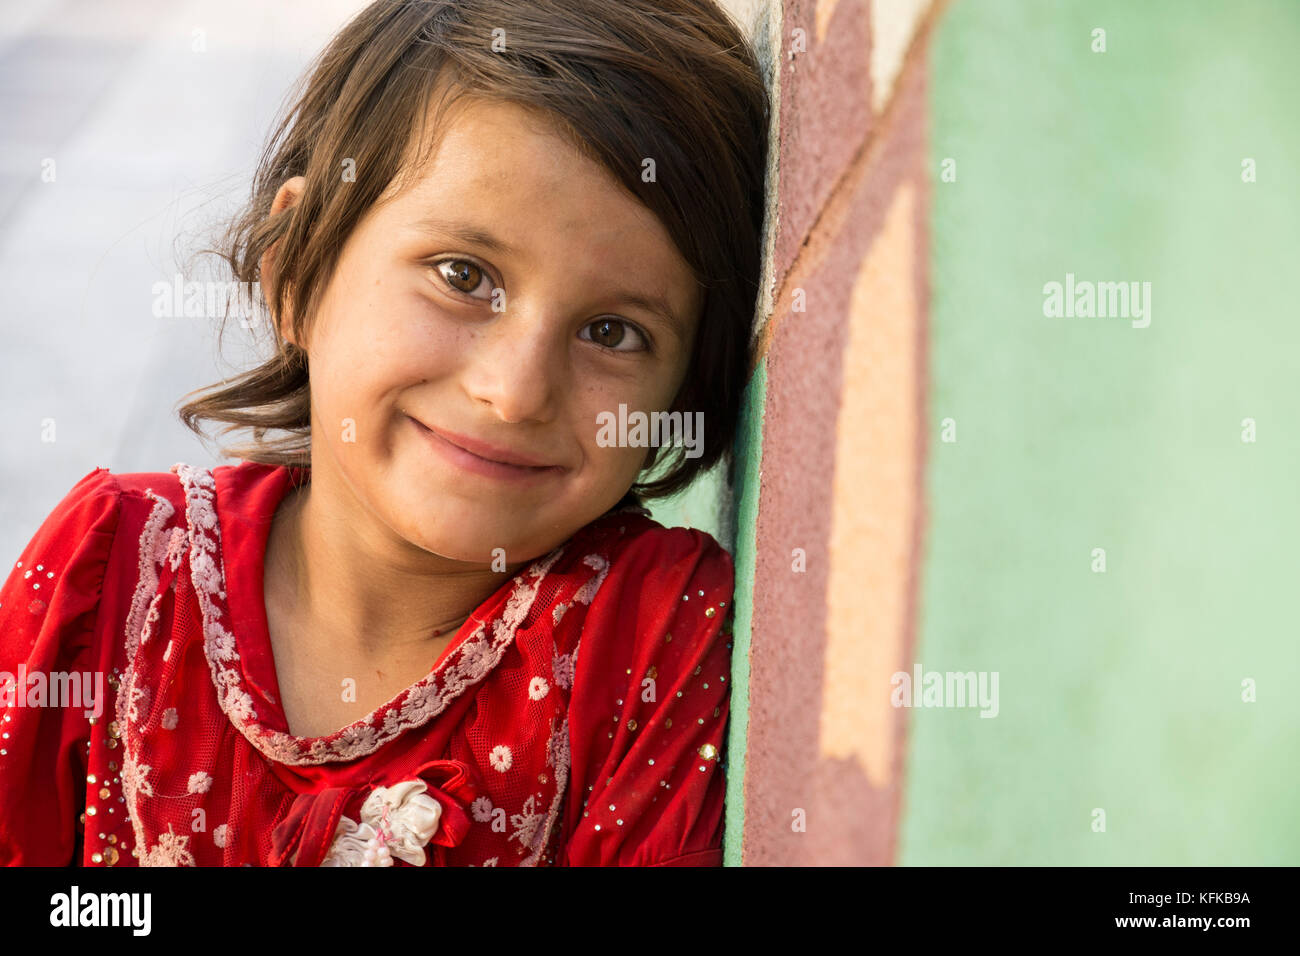 Tehran, IRAN - August 16, 2017  Close up portrait of a lonely  little girl selling small tissue packages at street pavement in front of painted wall Stock Photo